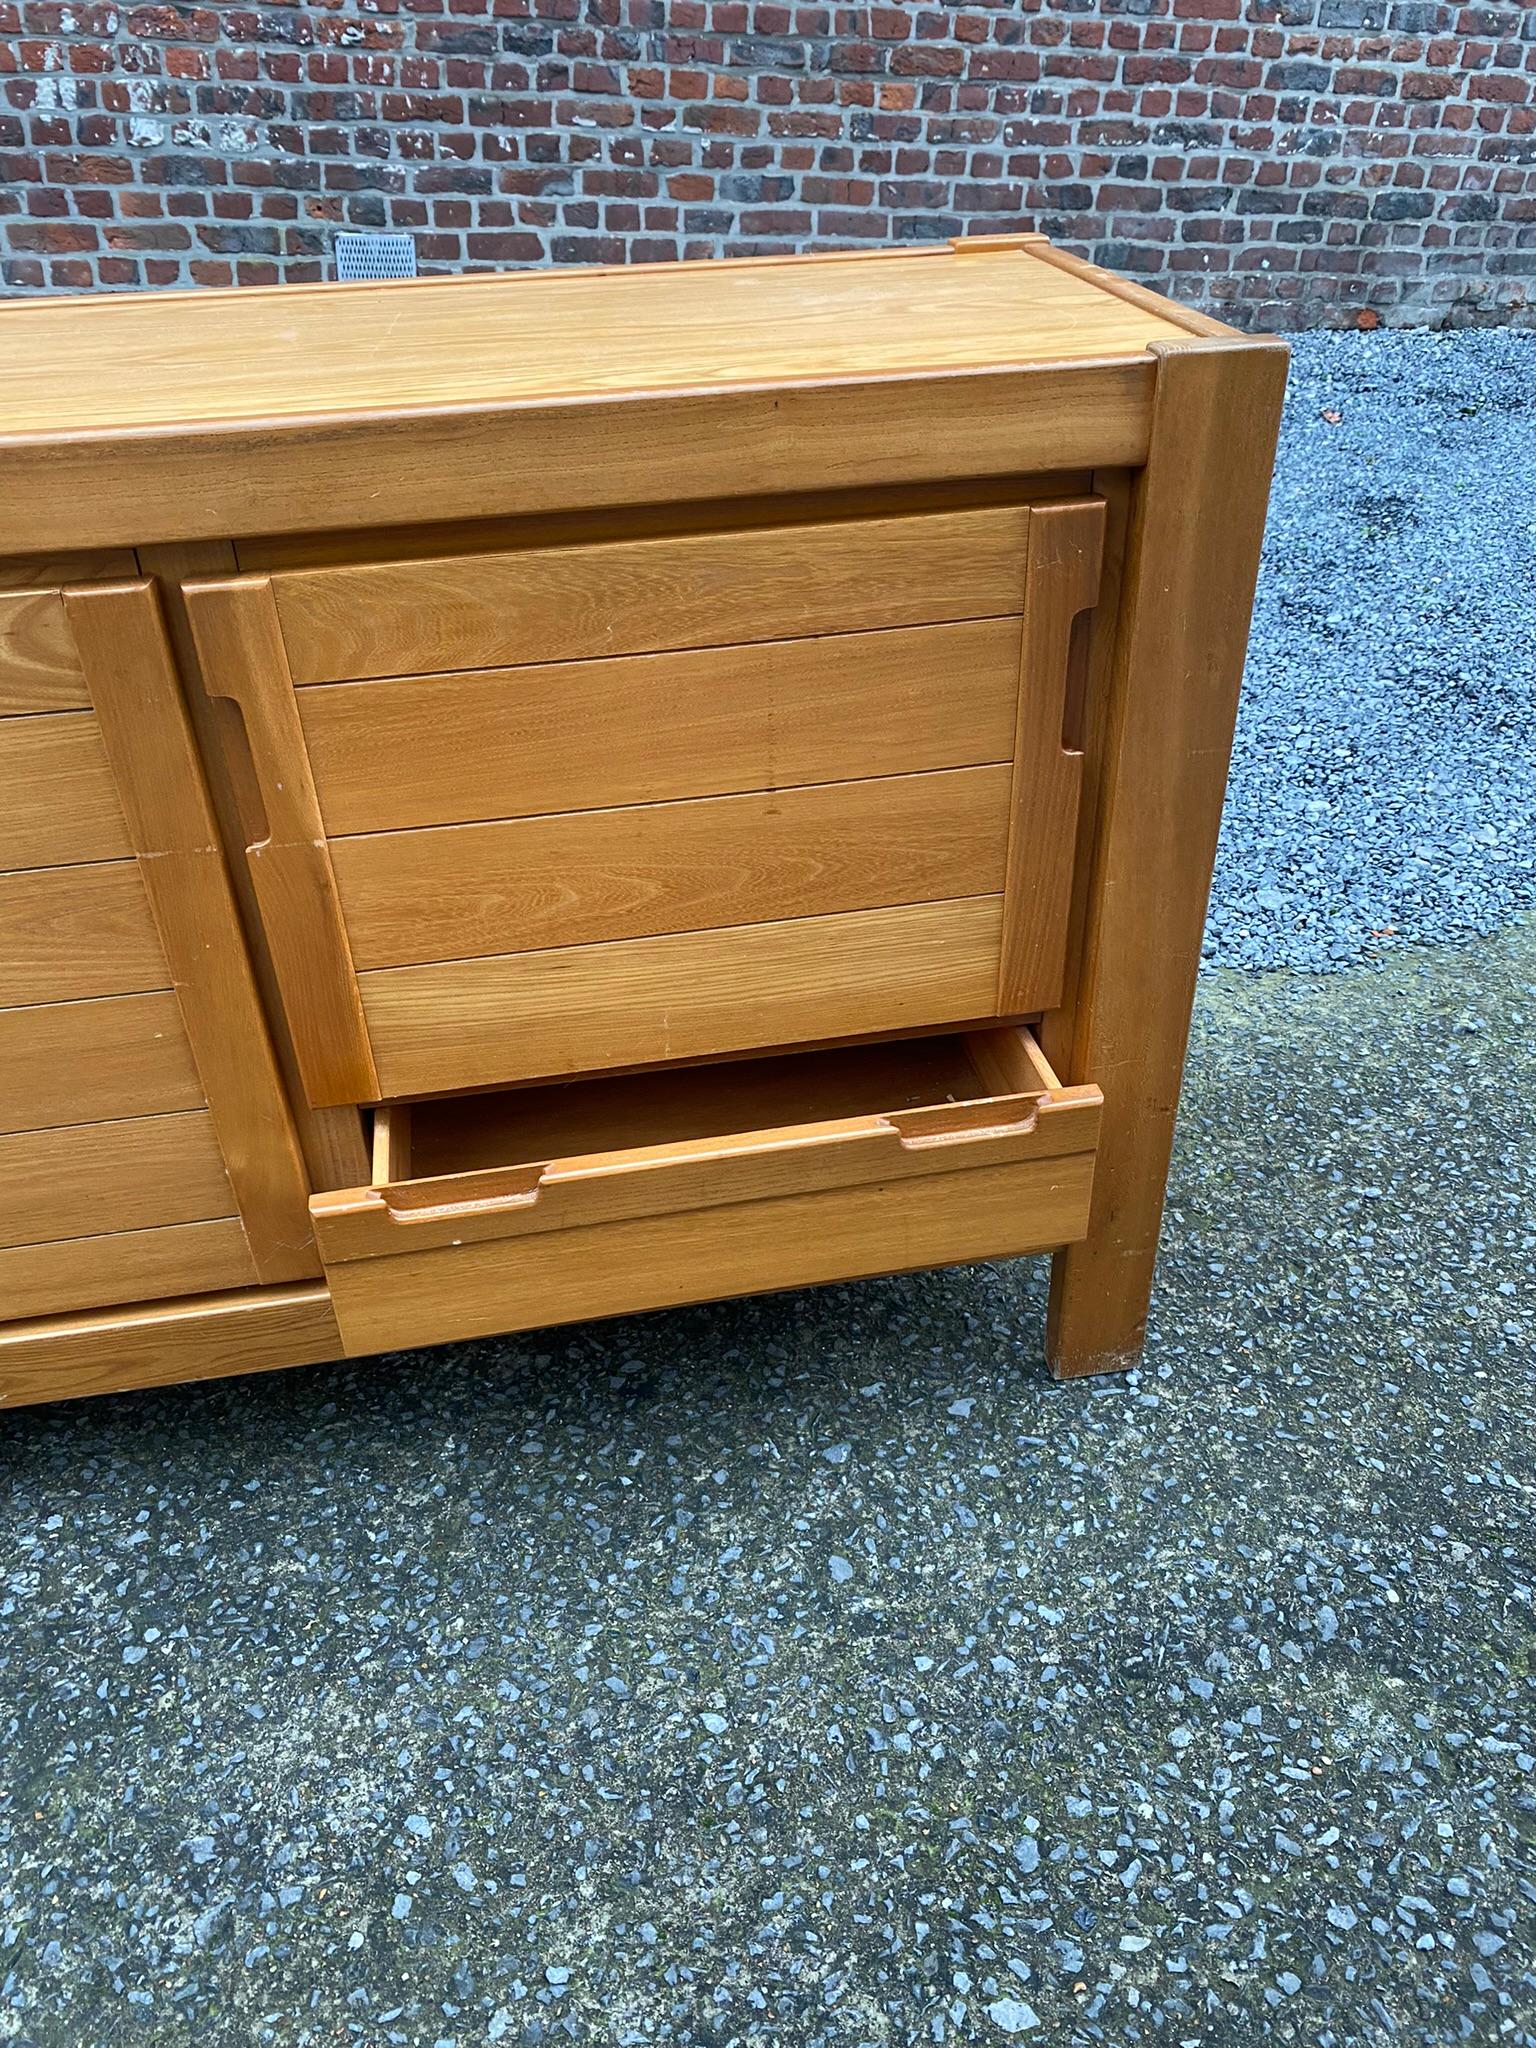 Mid-20th Century Maison Regain Sideboard in Solid Elm, circa 1960, Pierre Chapo Style For Sale